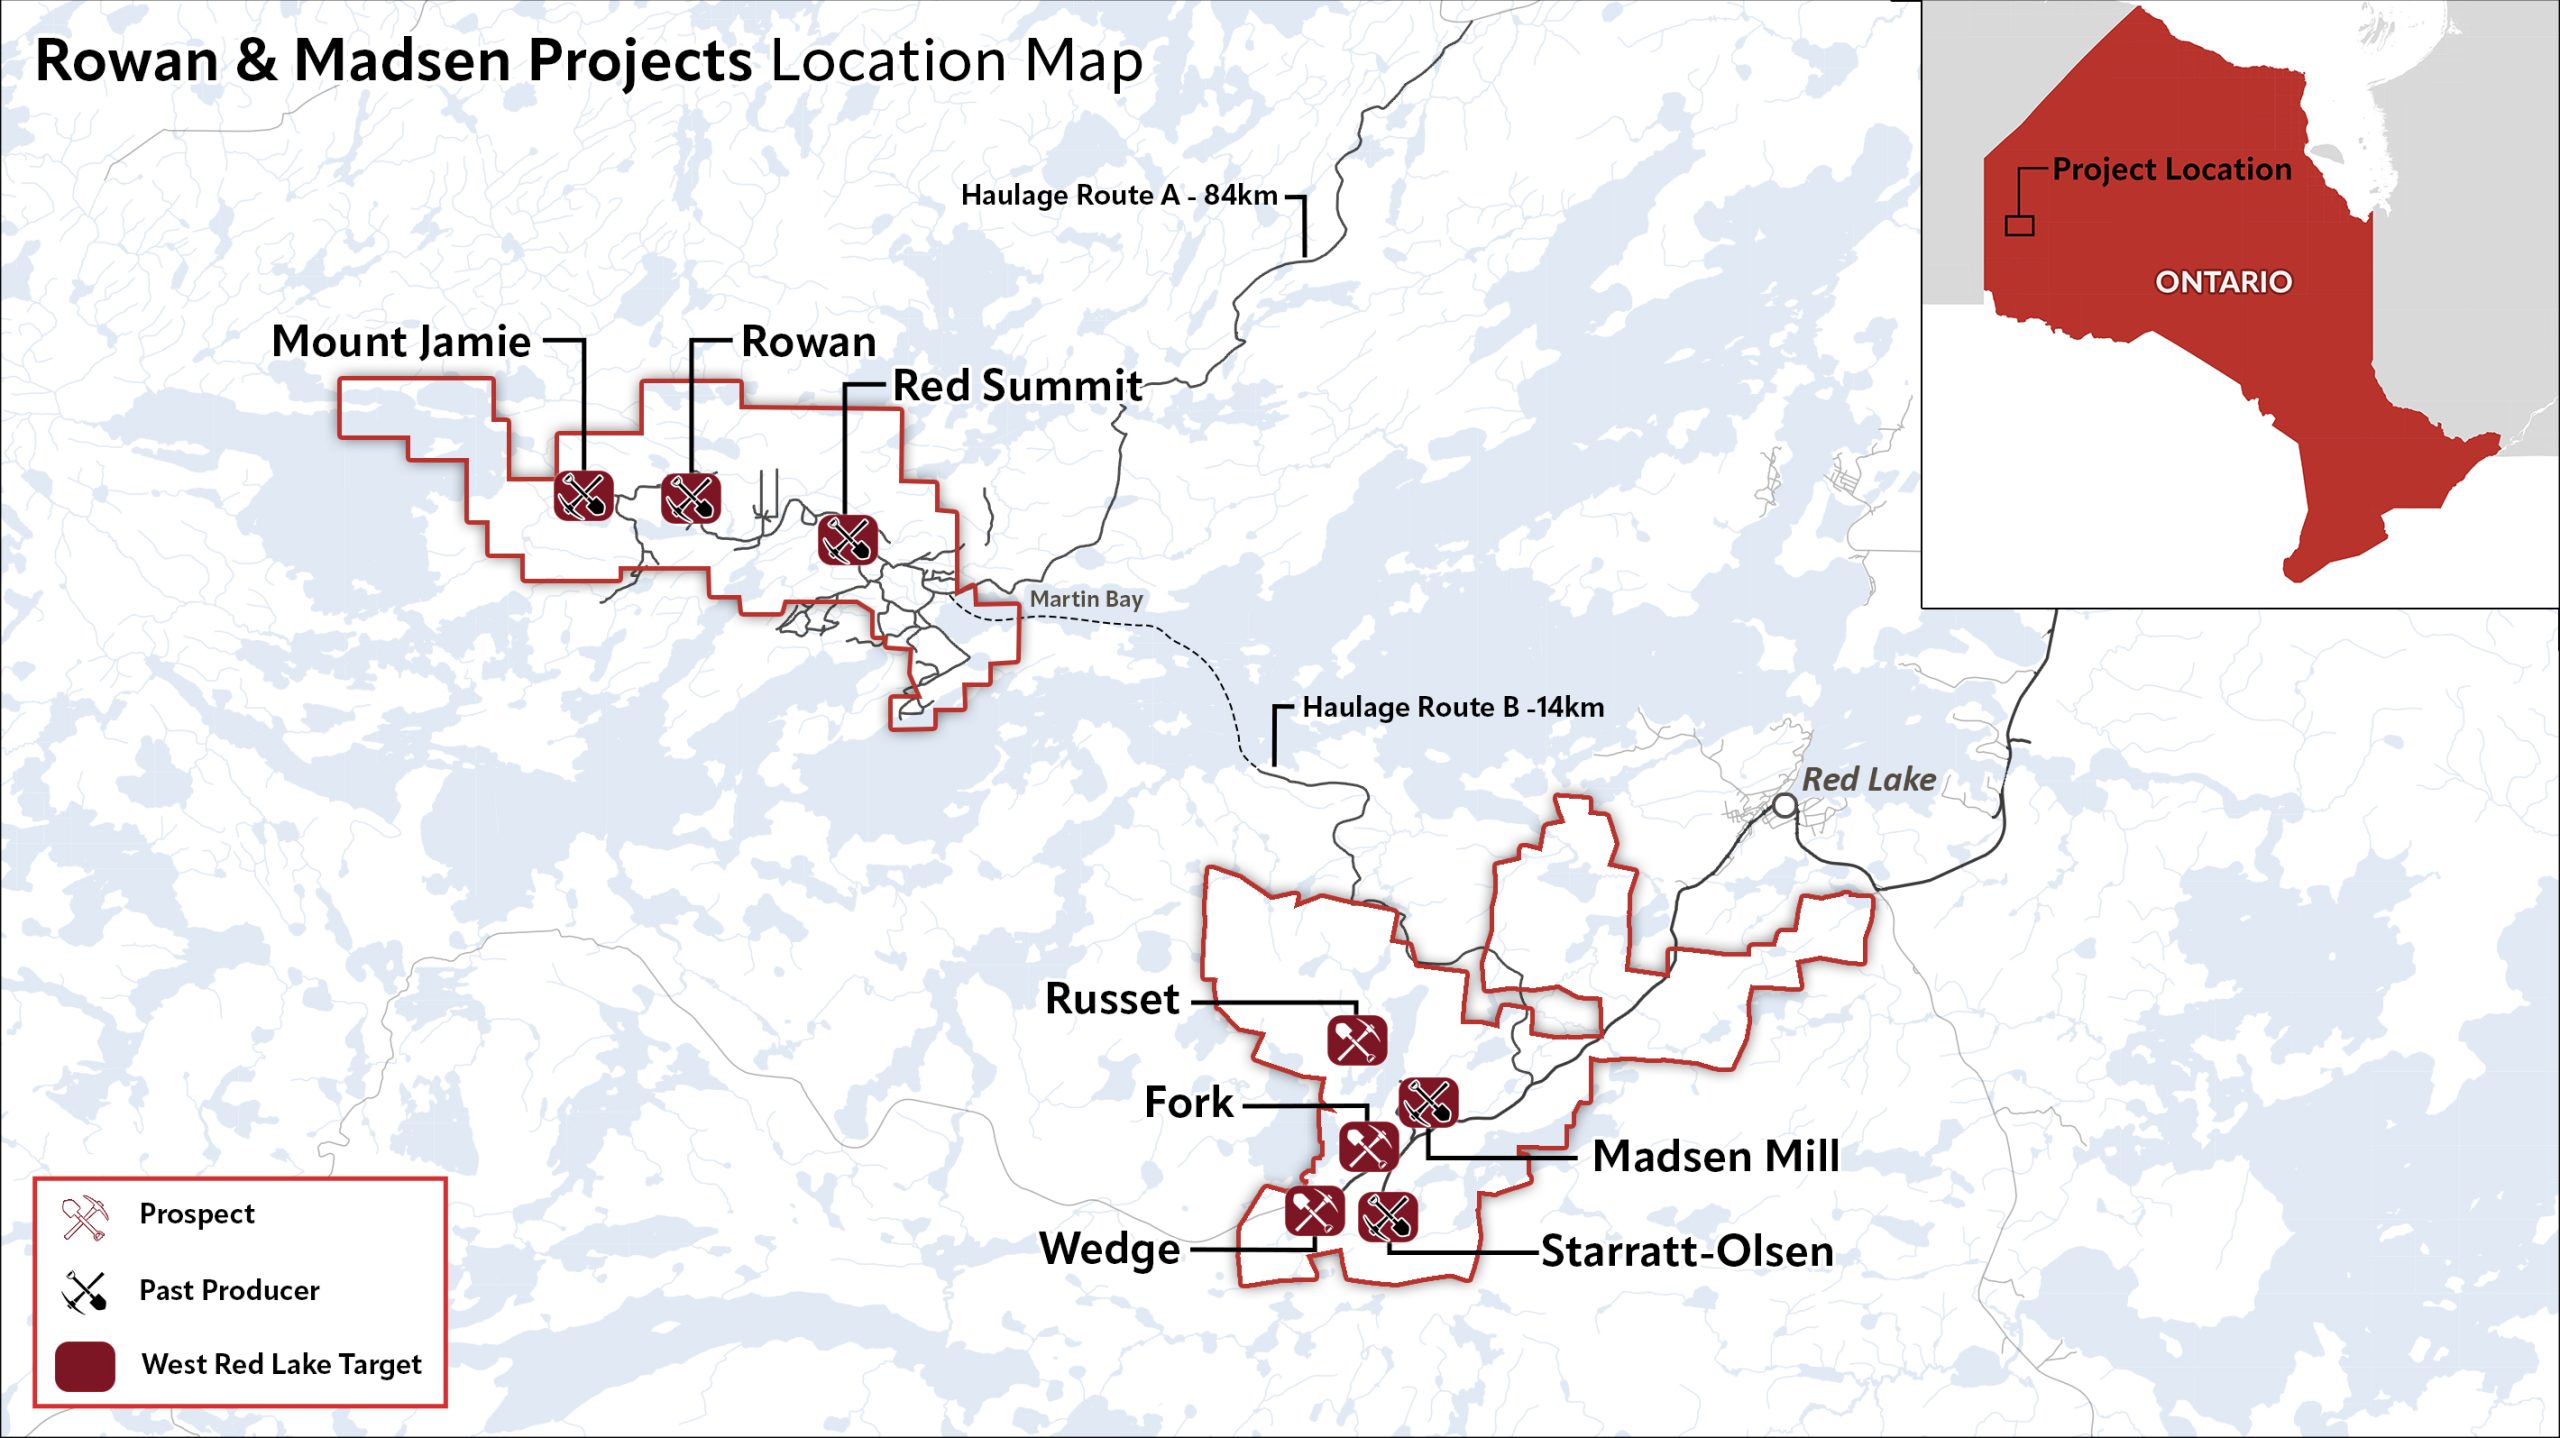 wrlg rowan and madsen projects location map scaled West Red Lake Gold Intersects 68.36 g/t Au over 1.1m and 13.83 g/t Au over 3.95m at South Austin Zone – Madsen Mine